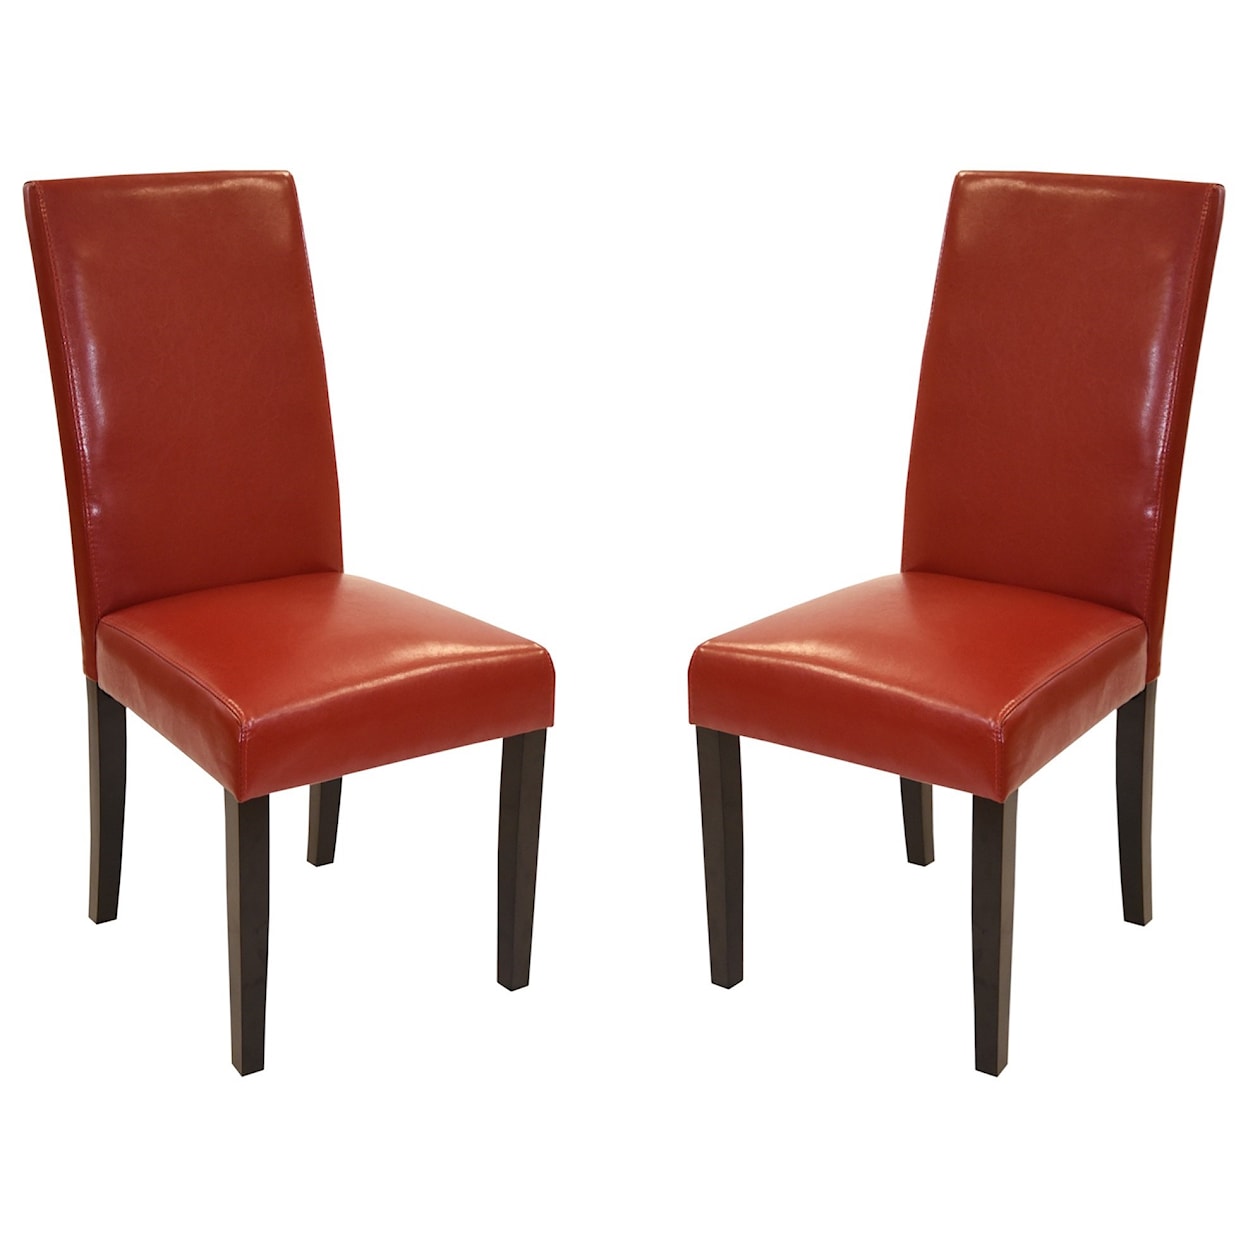 Armen Living MD-014  Set of 2 Side Chairs